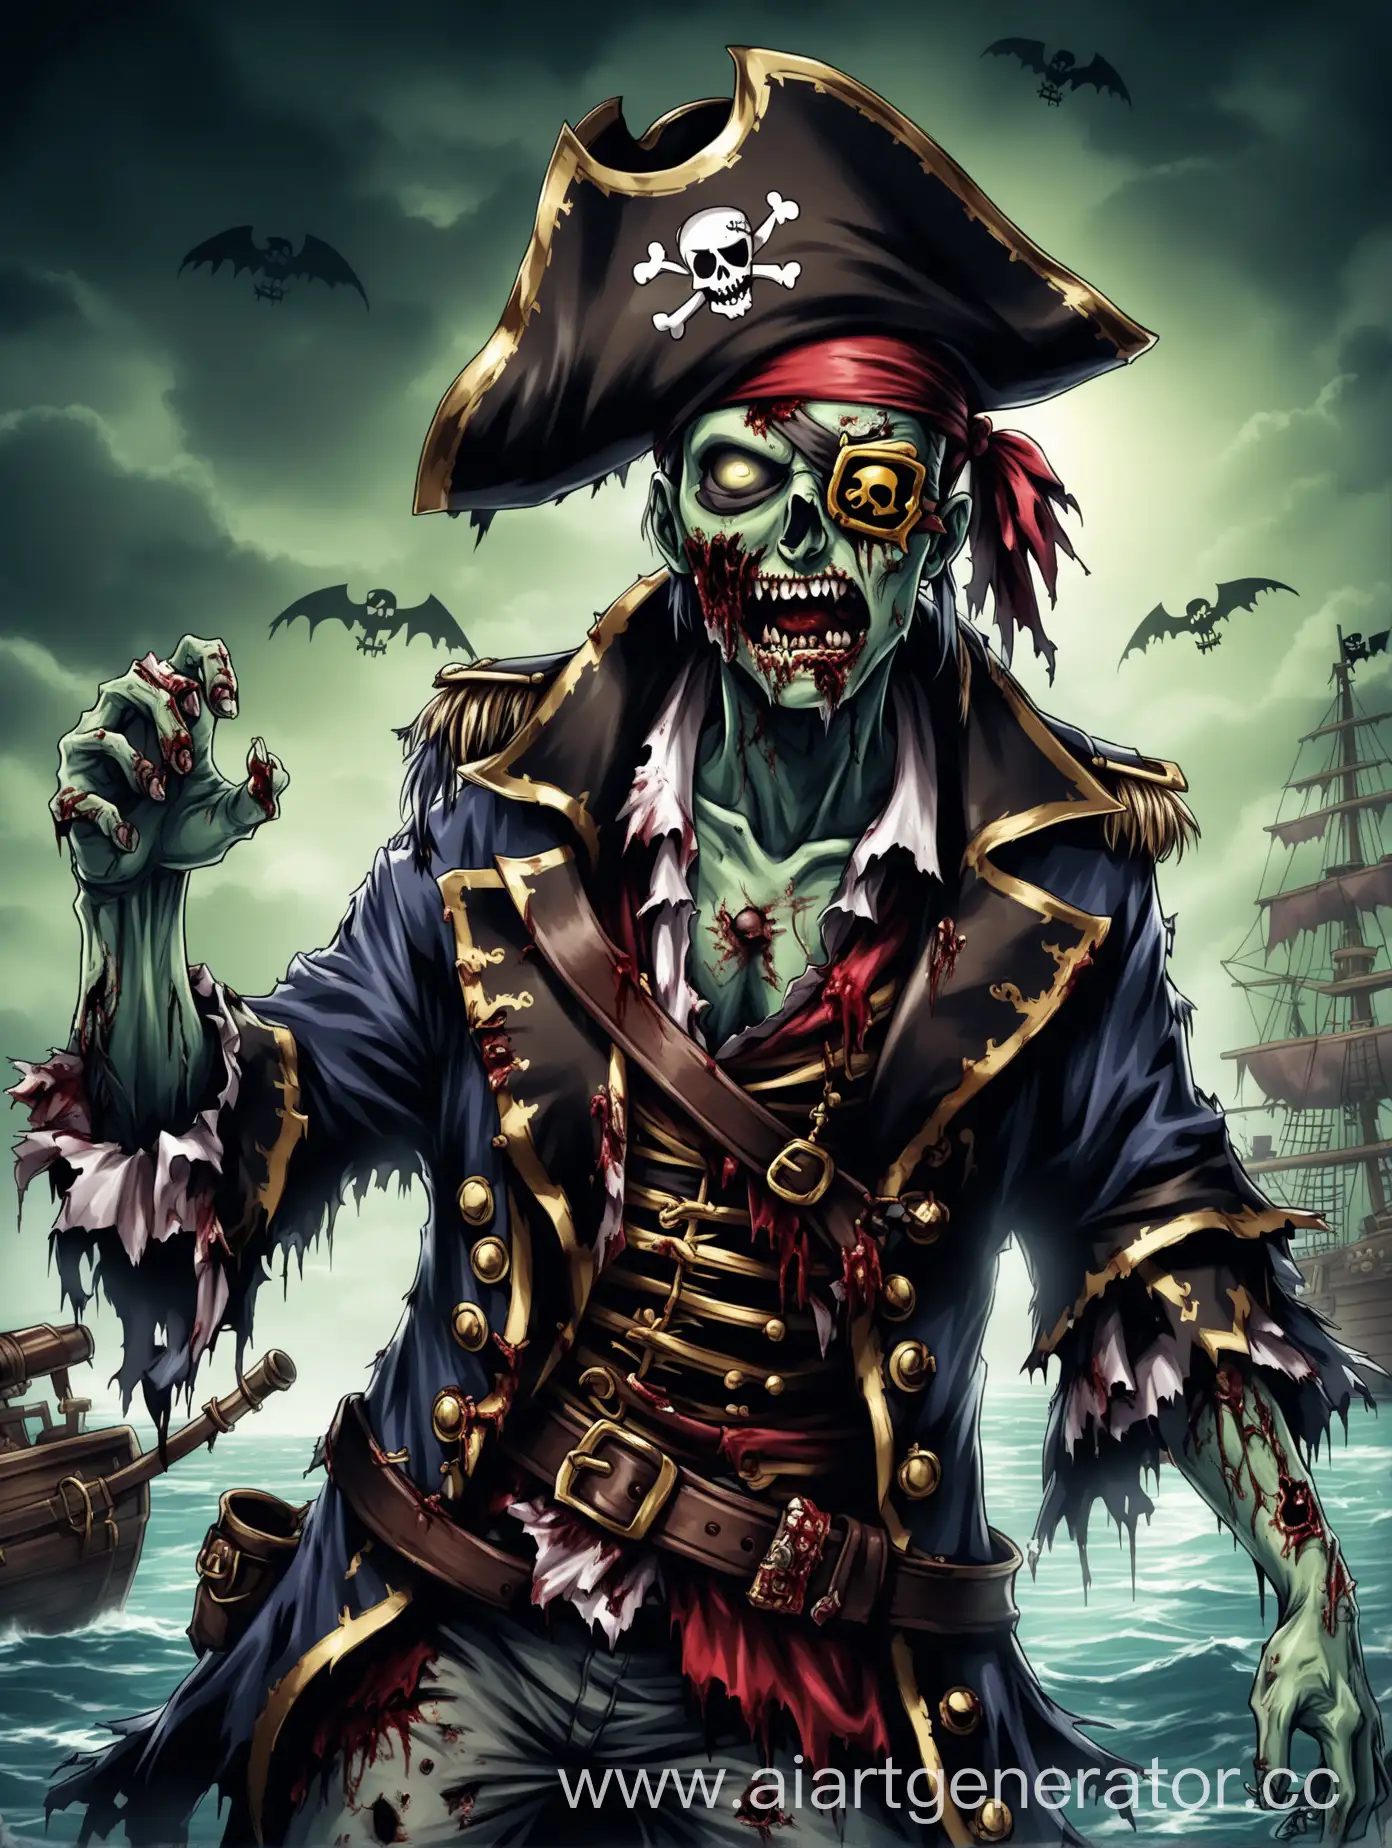 Eerie-Zombie-Pirate-Emerging-from-the-Foggy-Seas